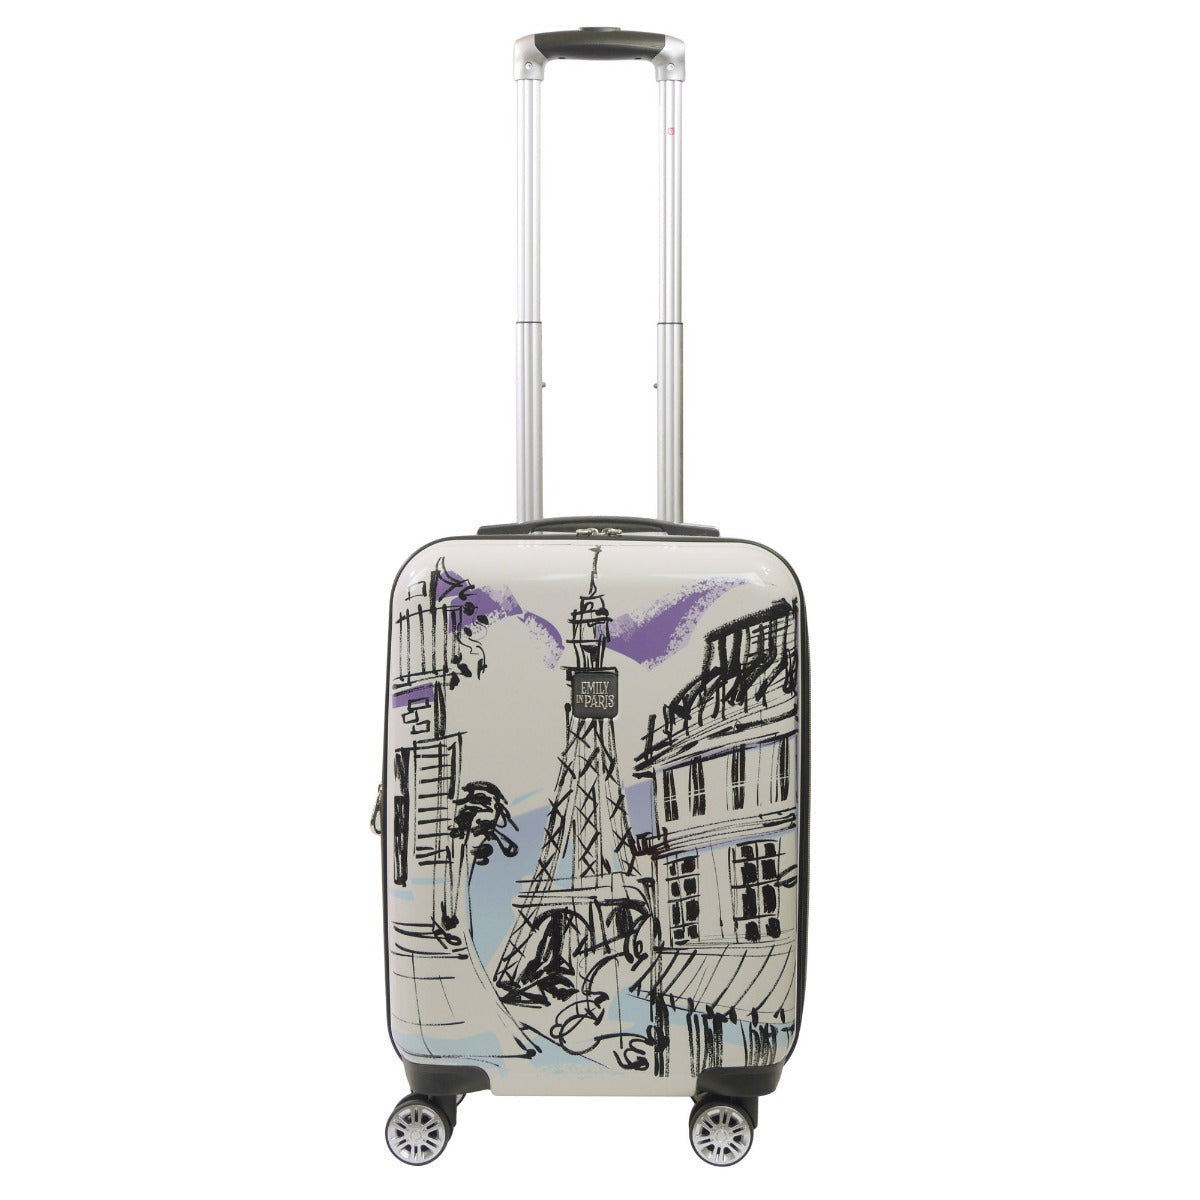 Emily in Paris 21 inch hardside expandable suitcase - Ful carry on luggage